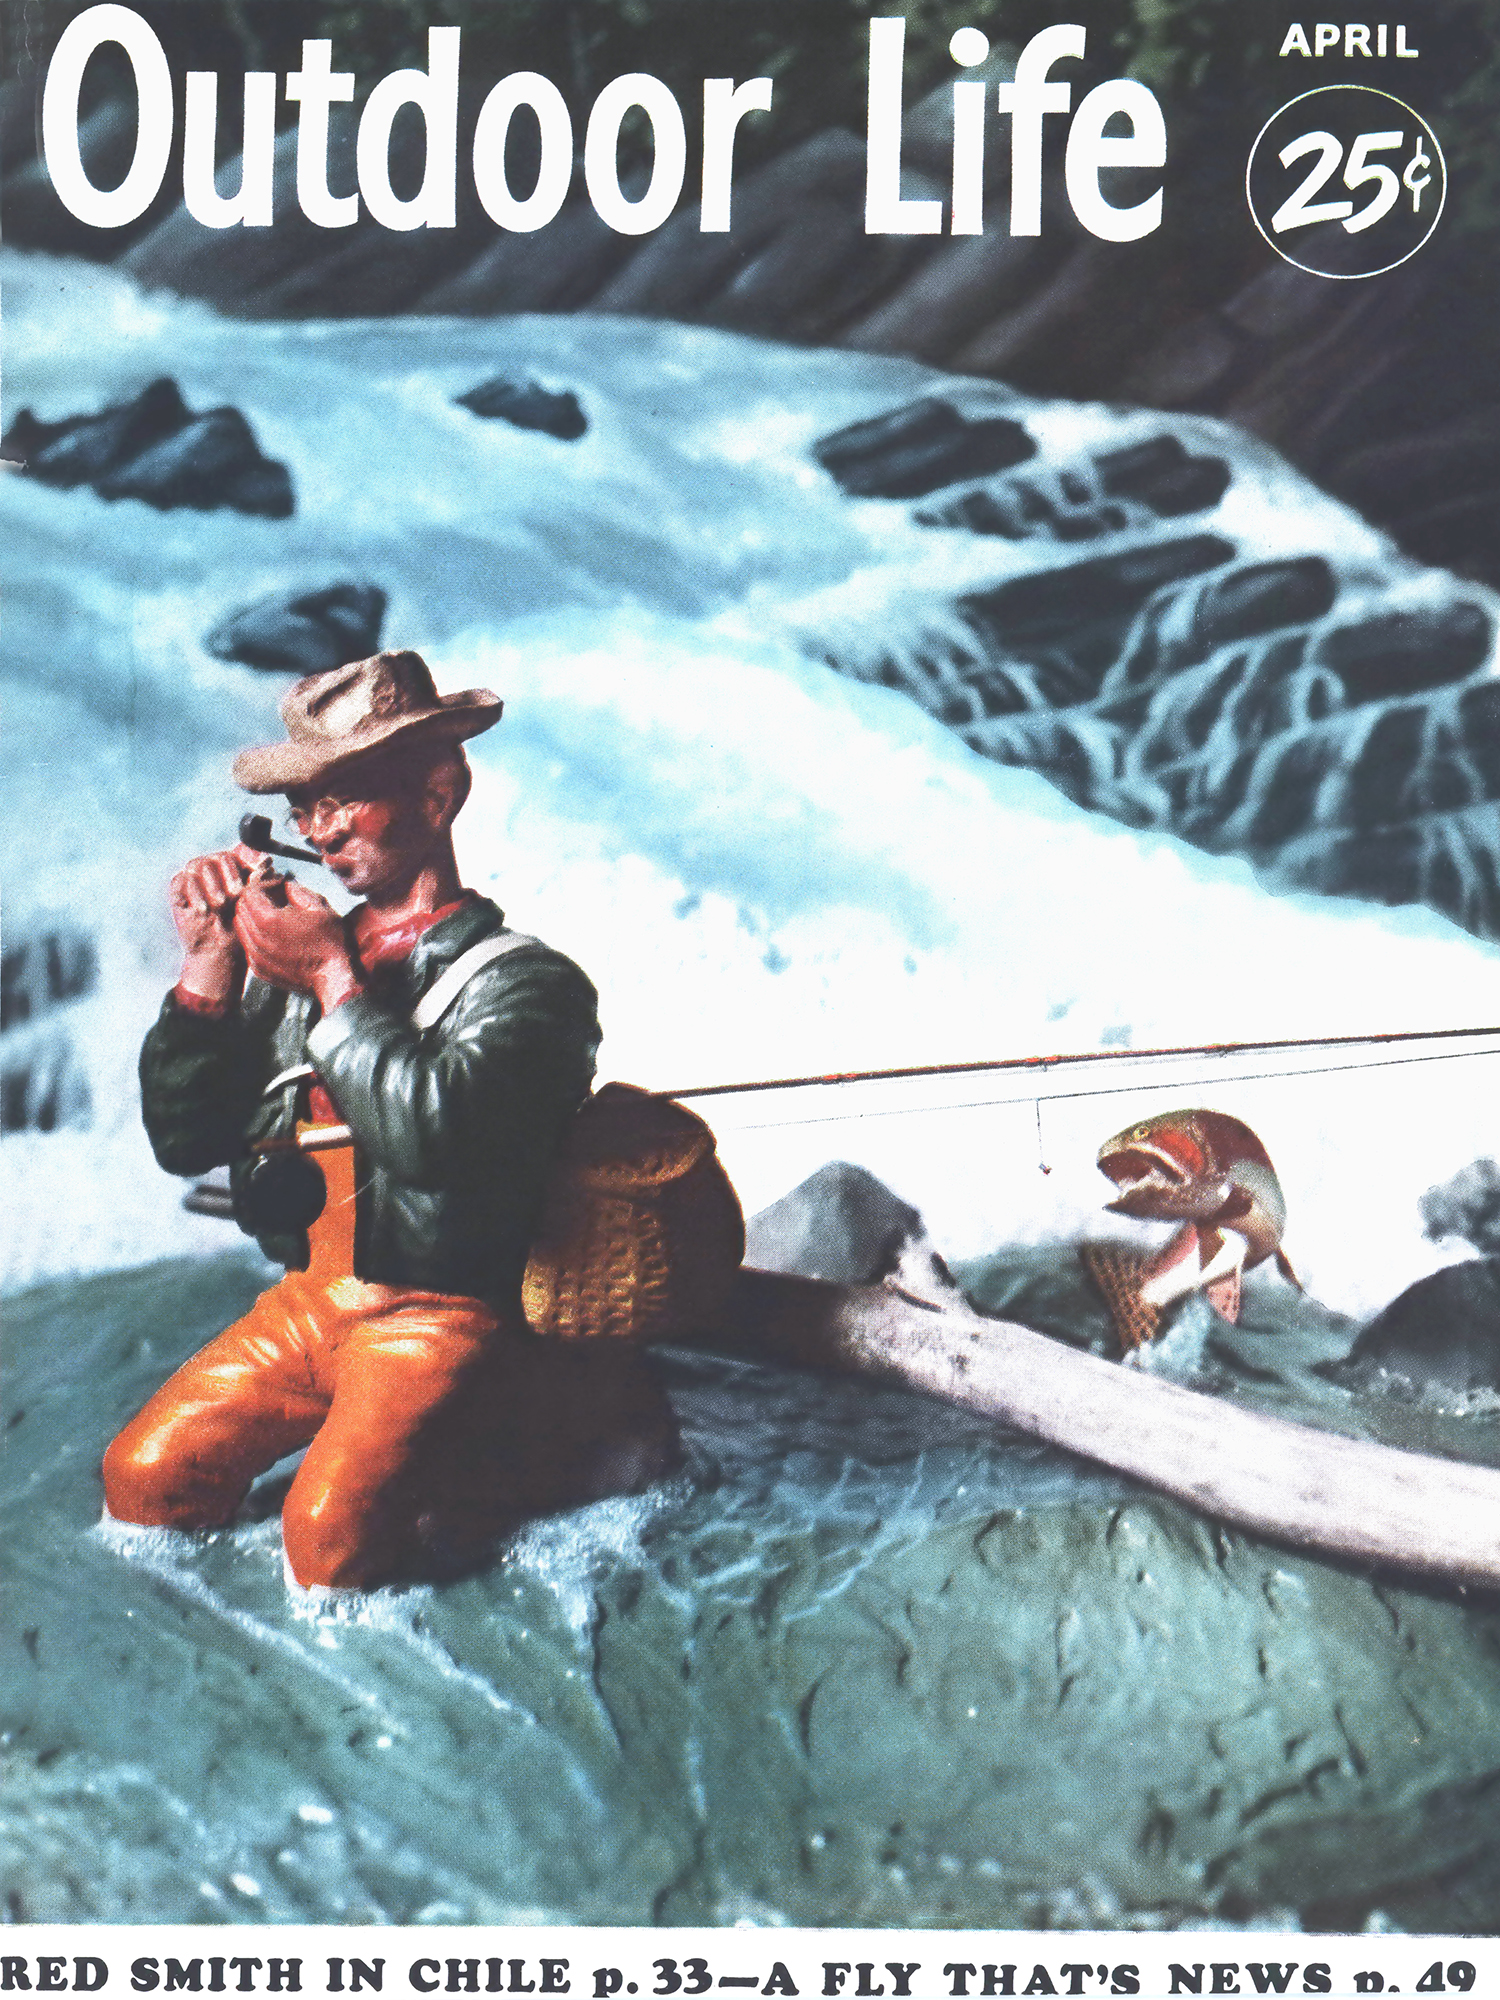 trout leaps behind fisherman who's lighting his pipe in this sculpture created for the cover